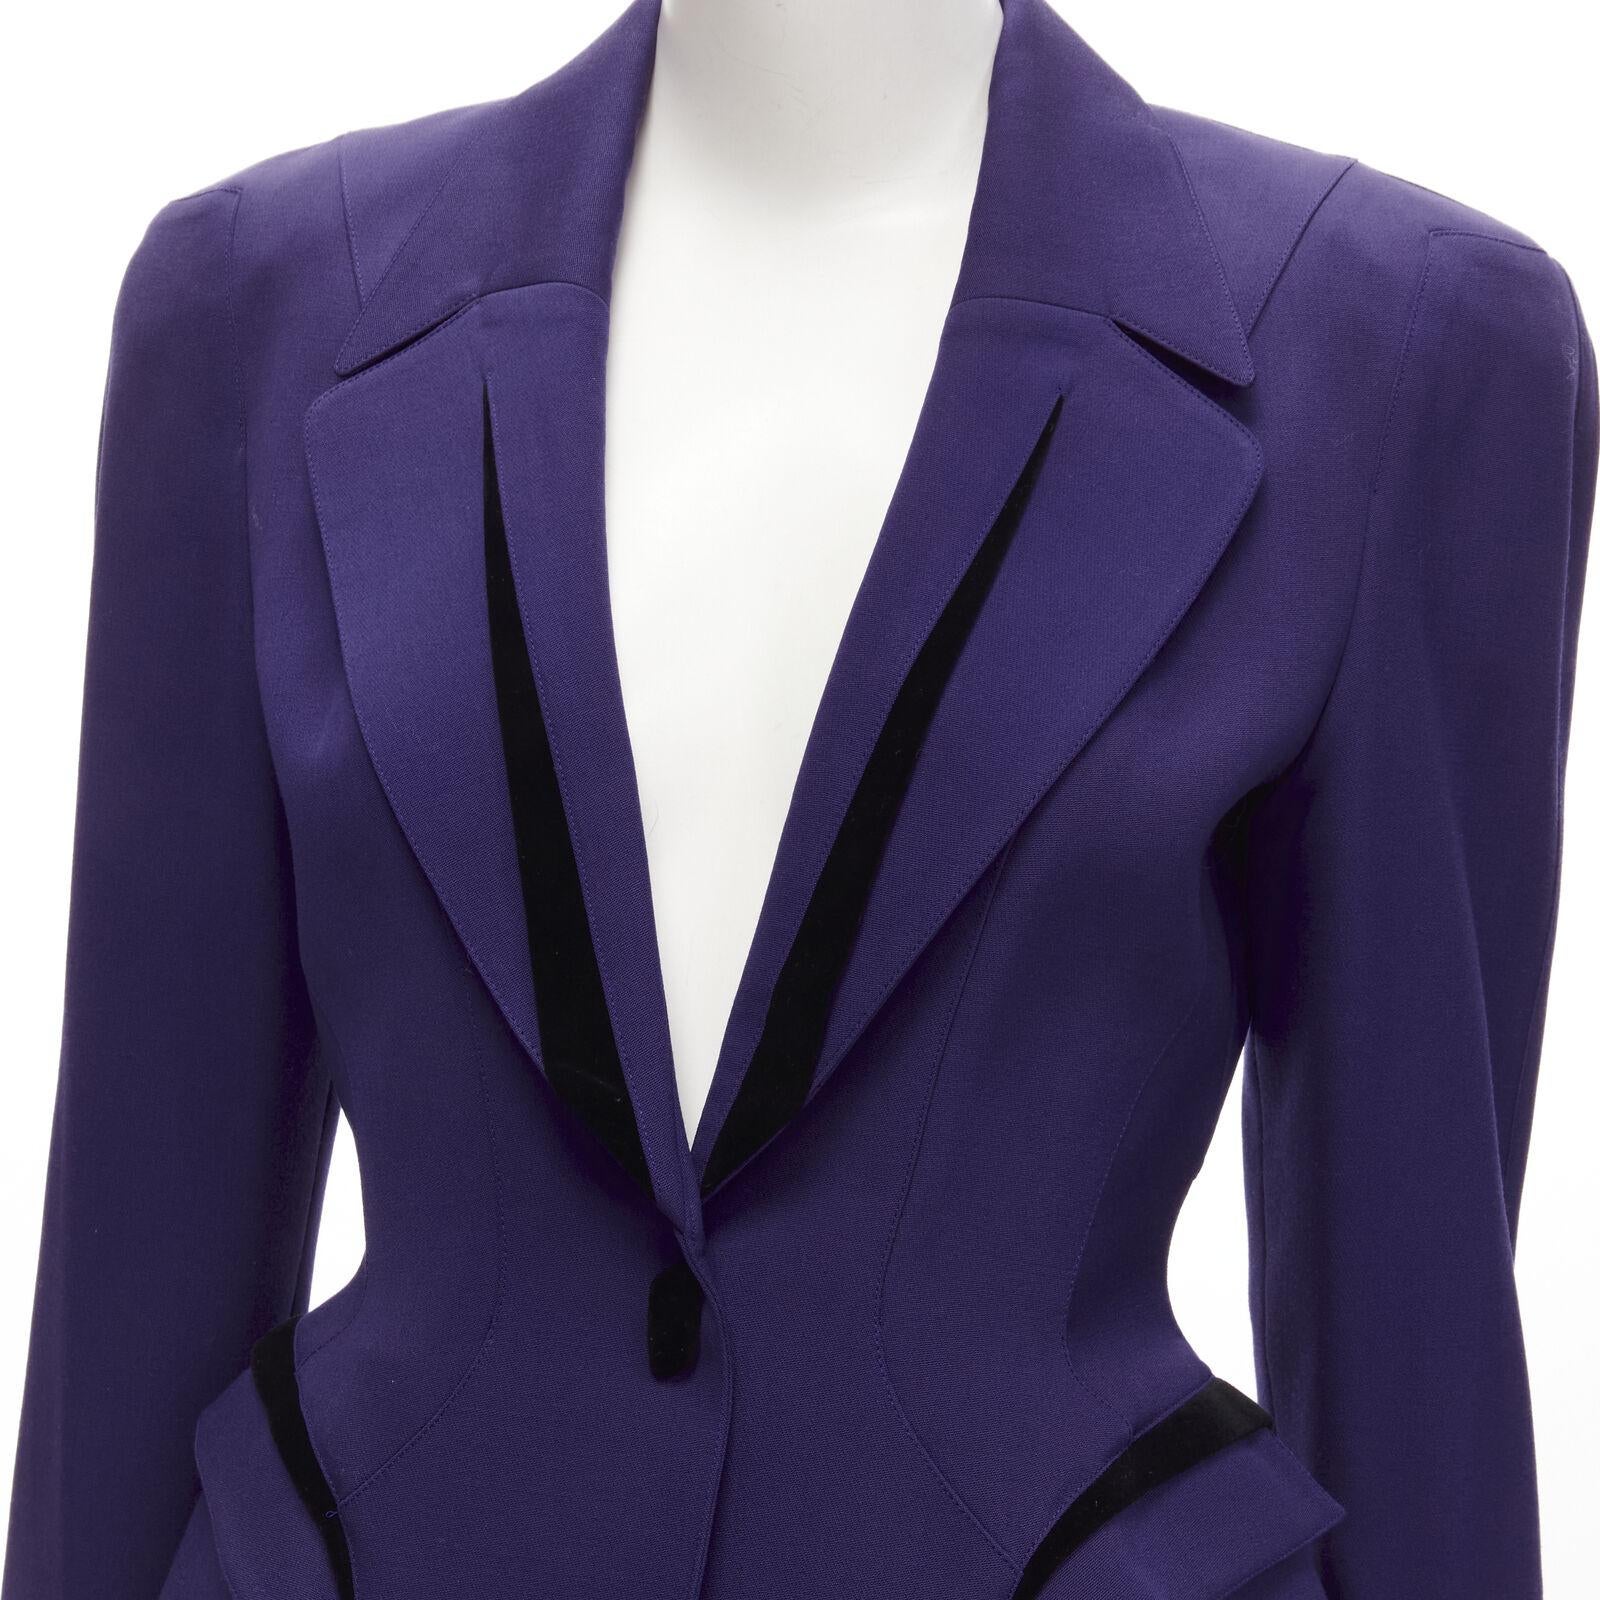 THIERRY MUGLER Vintage purple space age velvet peplum power blazer IT9AR S
Reference: TGAS/C01612
Brand: Thierry Mugler
Designer: Thierry Mugler
Collection: 1980s
Material: 100% Wool
Color: Purple
Pattern: Solid
Closure: Snap Buttons
Lining: